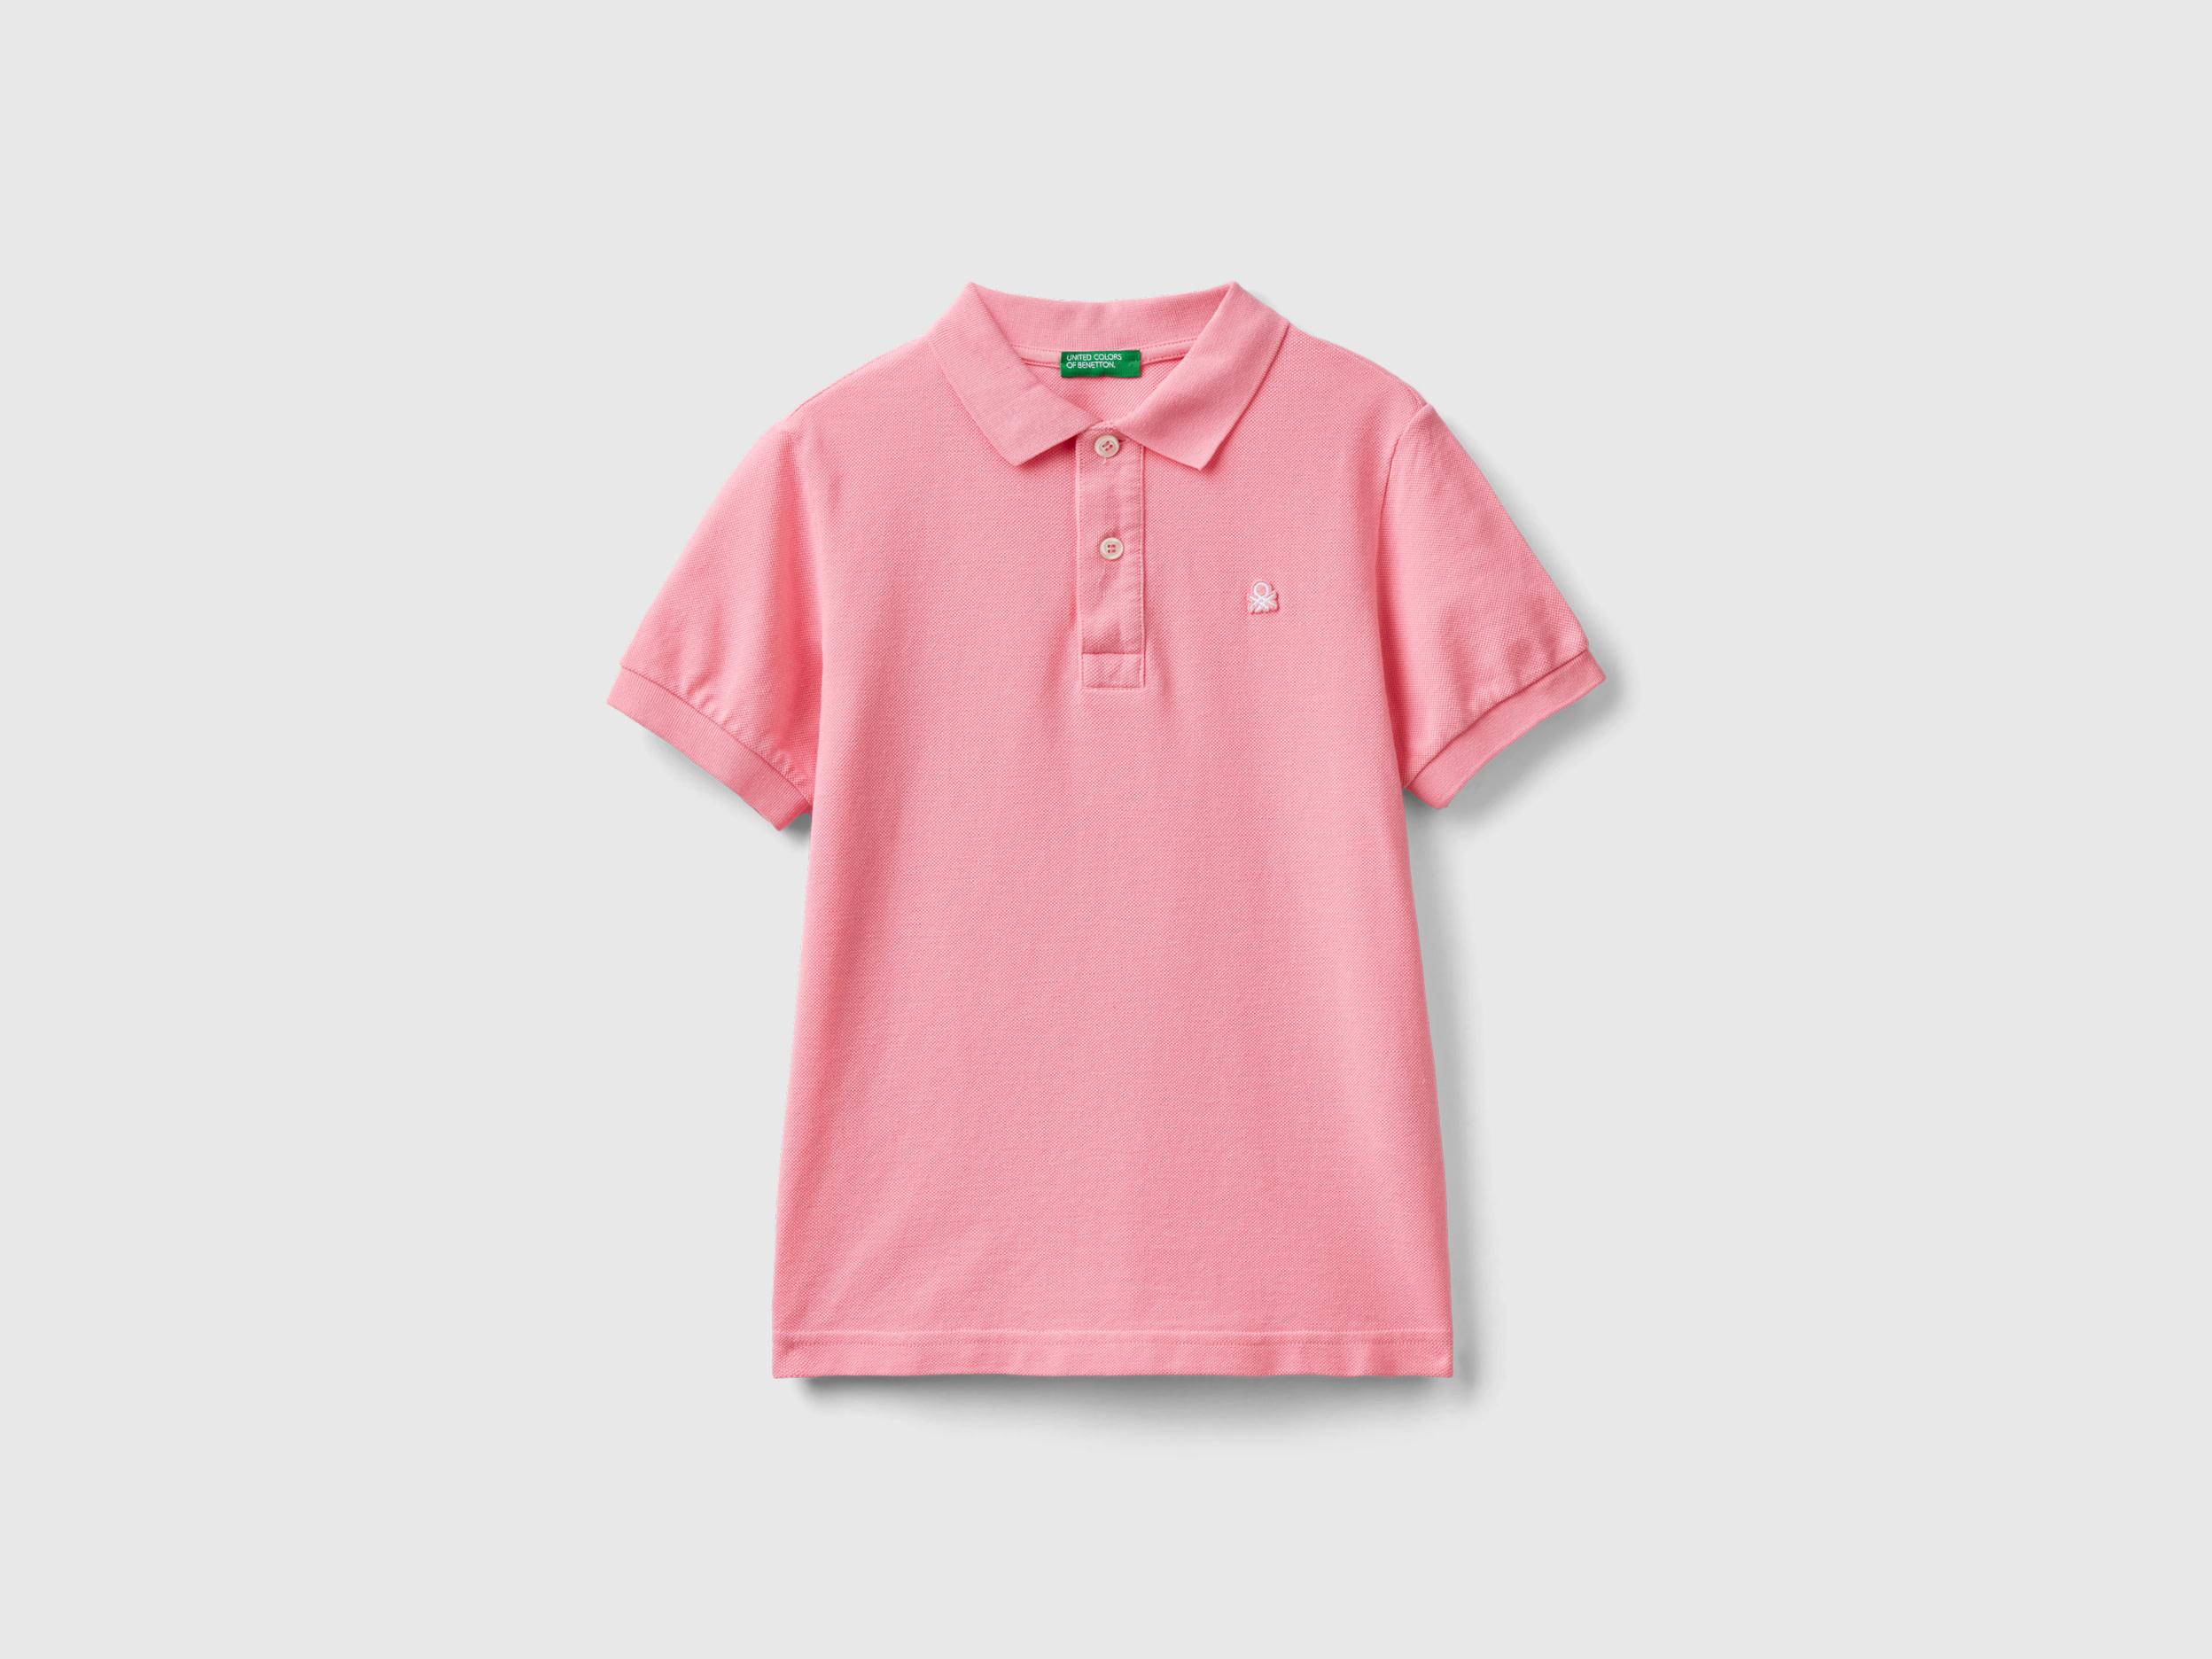 Image of Benetton, Slim Fit Polo In 100% Organic Cotton, size L, Pink, Kids